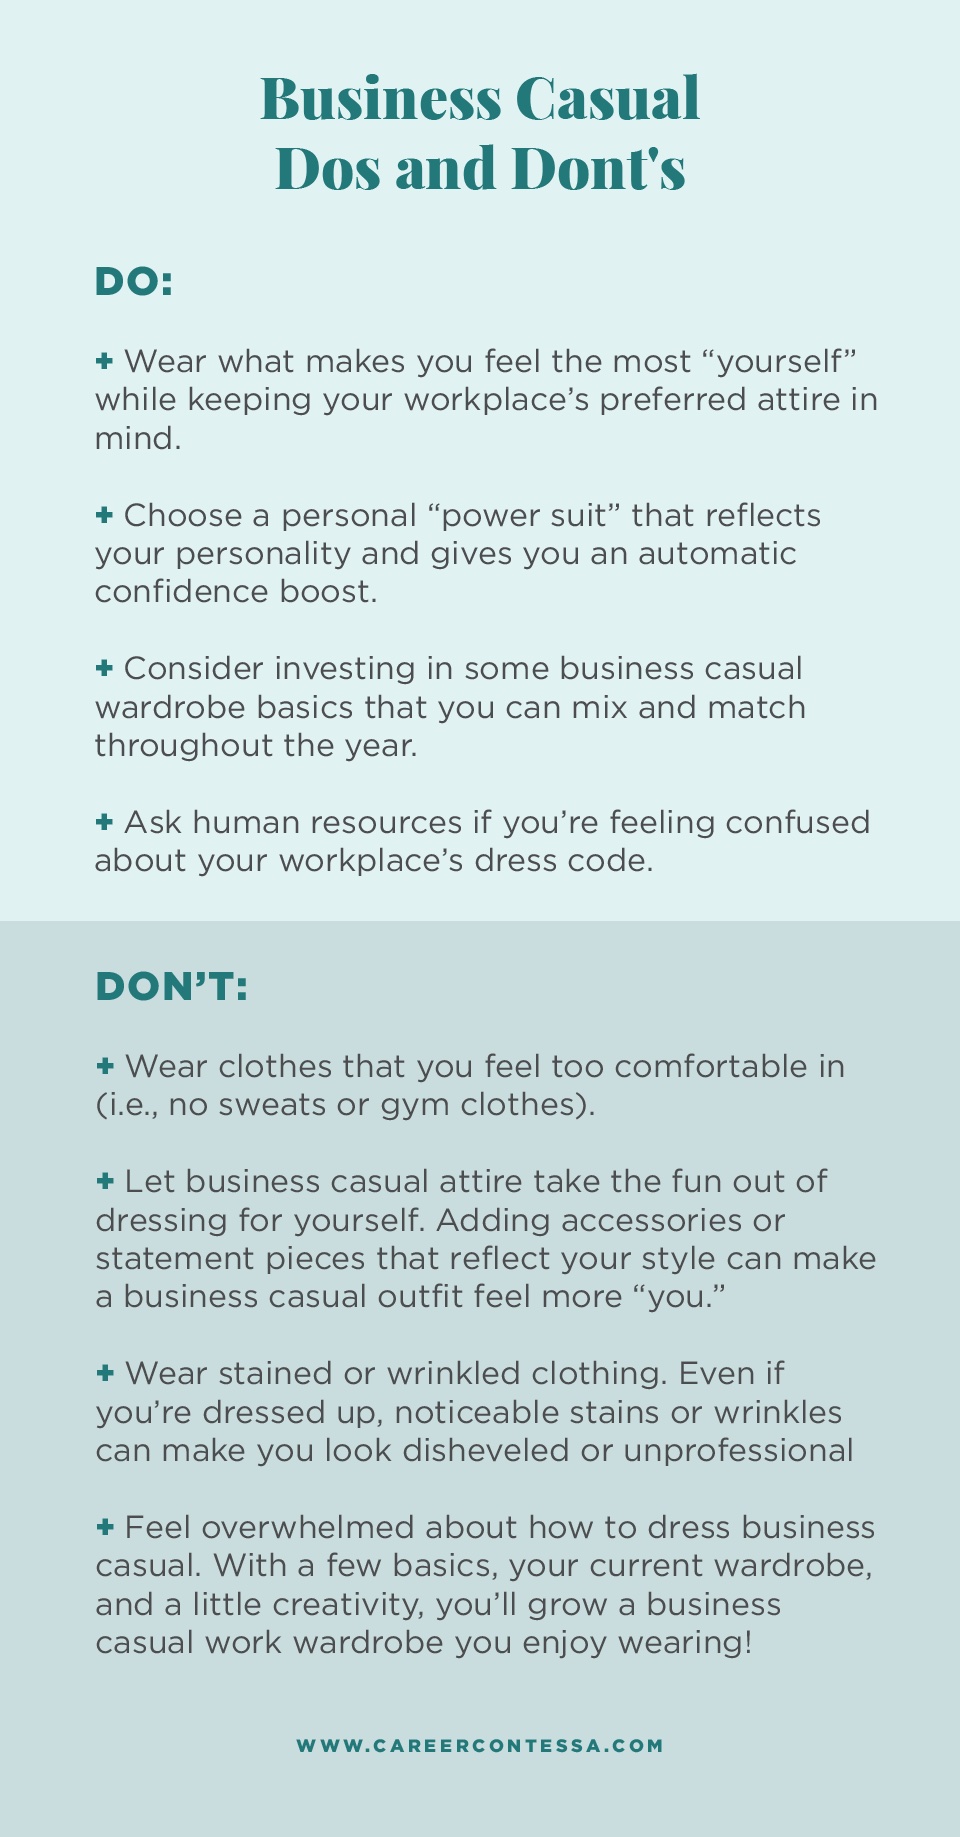 Dos and Don'ts of Dressing Business Casual at work